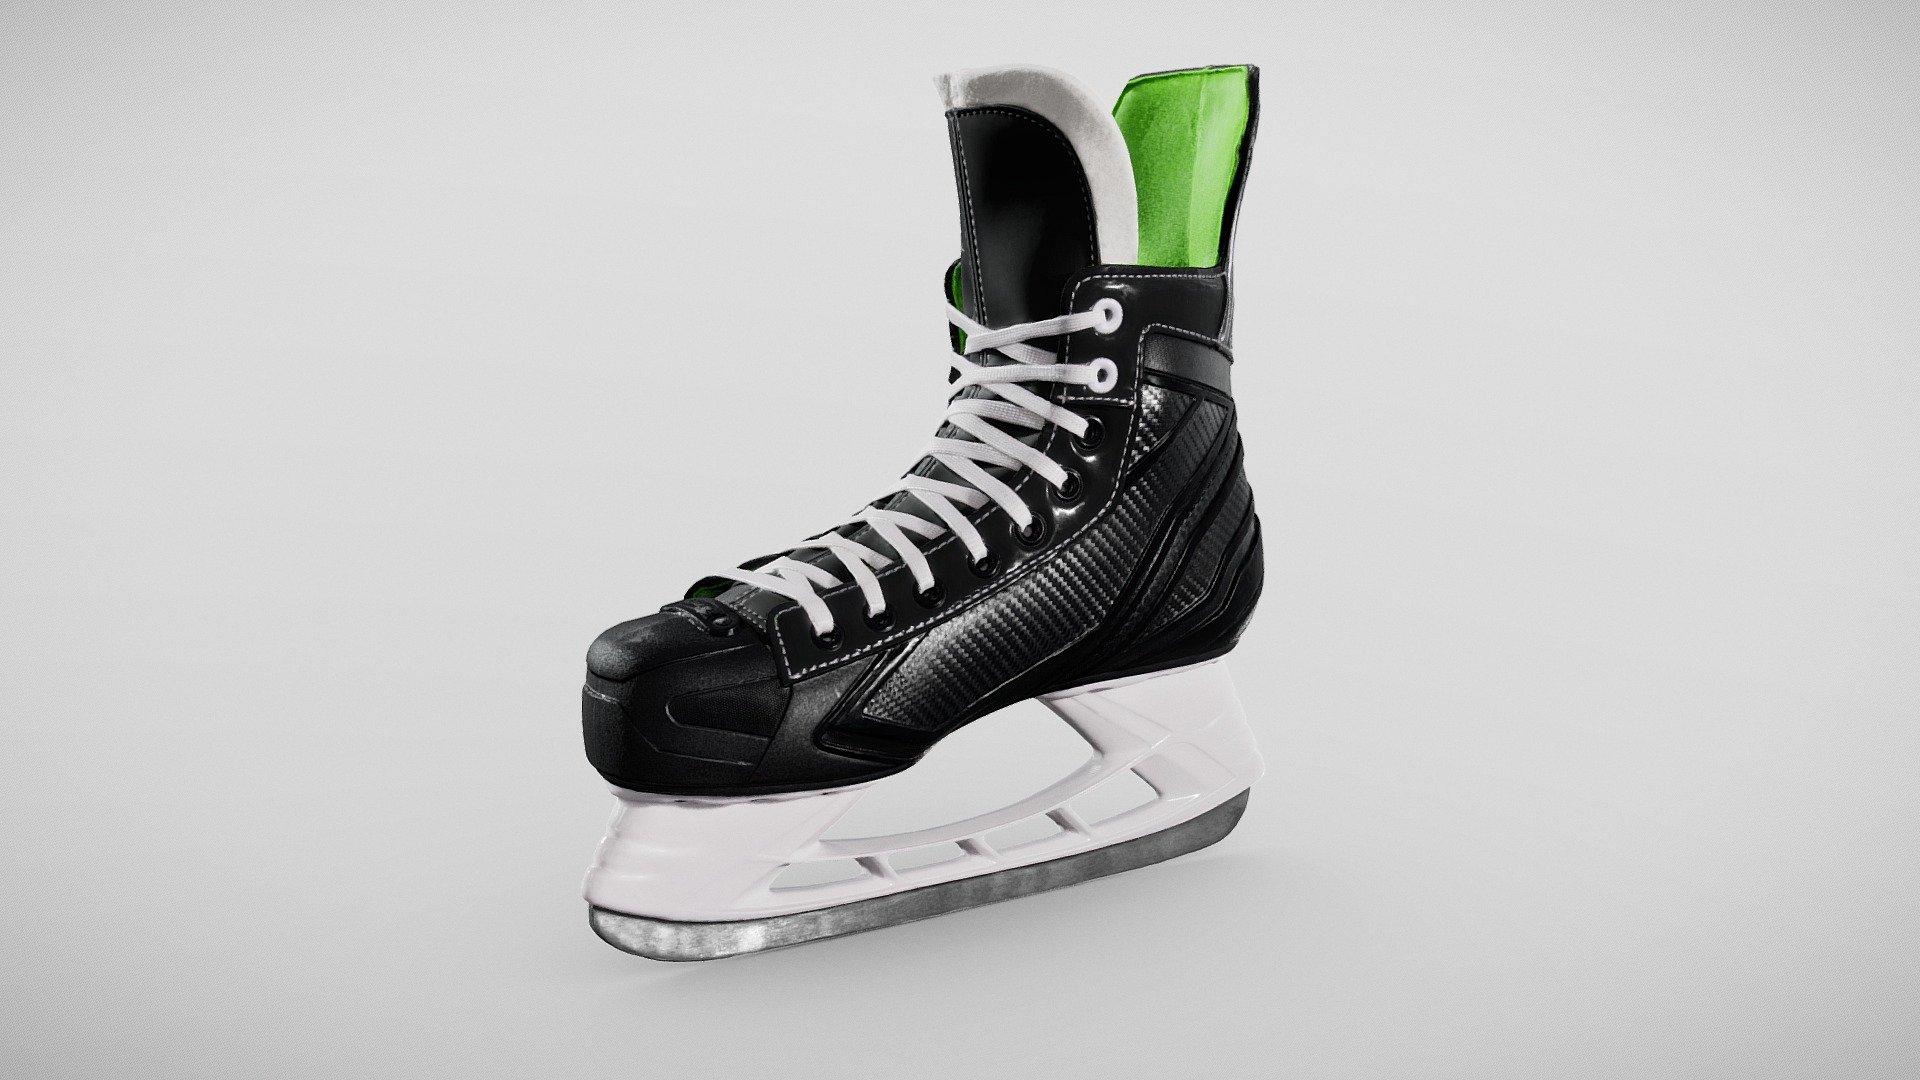 Bauer Ice Skating Boot 

Features stainless steel runner with an easy-to-balance-on 13ft. radius, and a soft and comfortable microfiber liner, putting a premium on comfort throughout.

29.6 x 10.6 x 30.8 cm (67 micrometers per texel @ 8k)

Scanned using advanced technology developed by inciprocal Inc. that enables highly photo-realistic reproduction of real-world products in virtual environments. Our hardware and software technology combines advanced photometry, structured light, photogrammtery and light fields to capture and generate accurate material representations from tens of thousands of images targeting real-time and offline path-traced PBR compatible renderers.

Zip file includes low-poly OBJ mesh (in meters) with a set of 8k PBR textures compressed with lossless JPEG (no chroma sub-sampling) 3d model